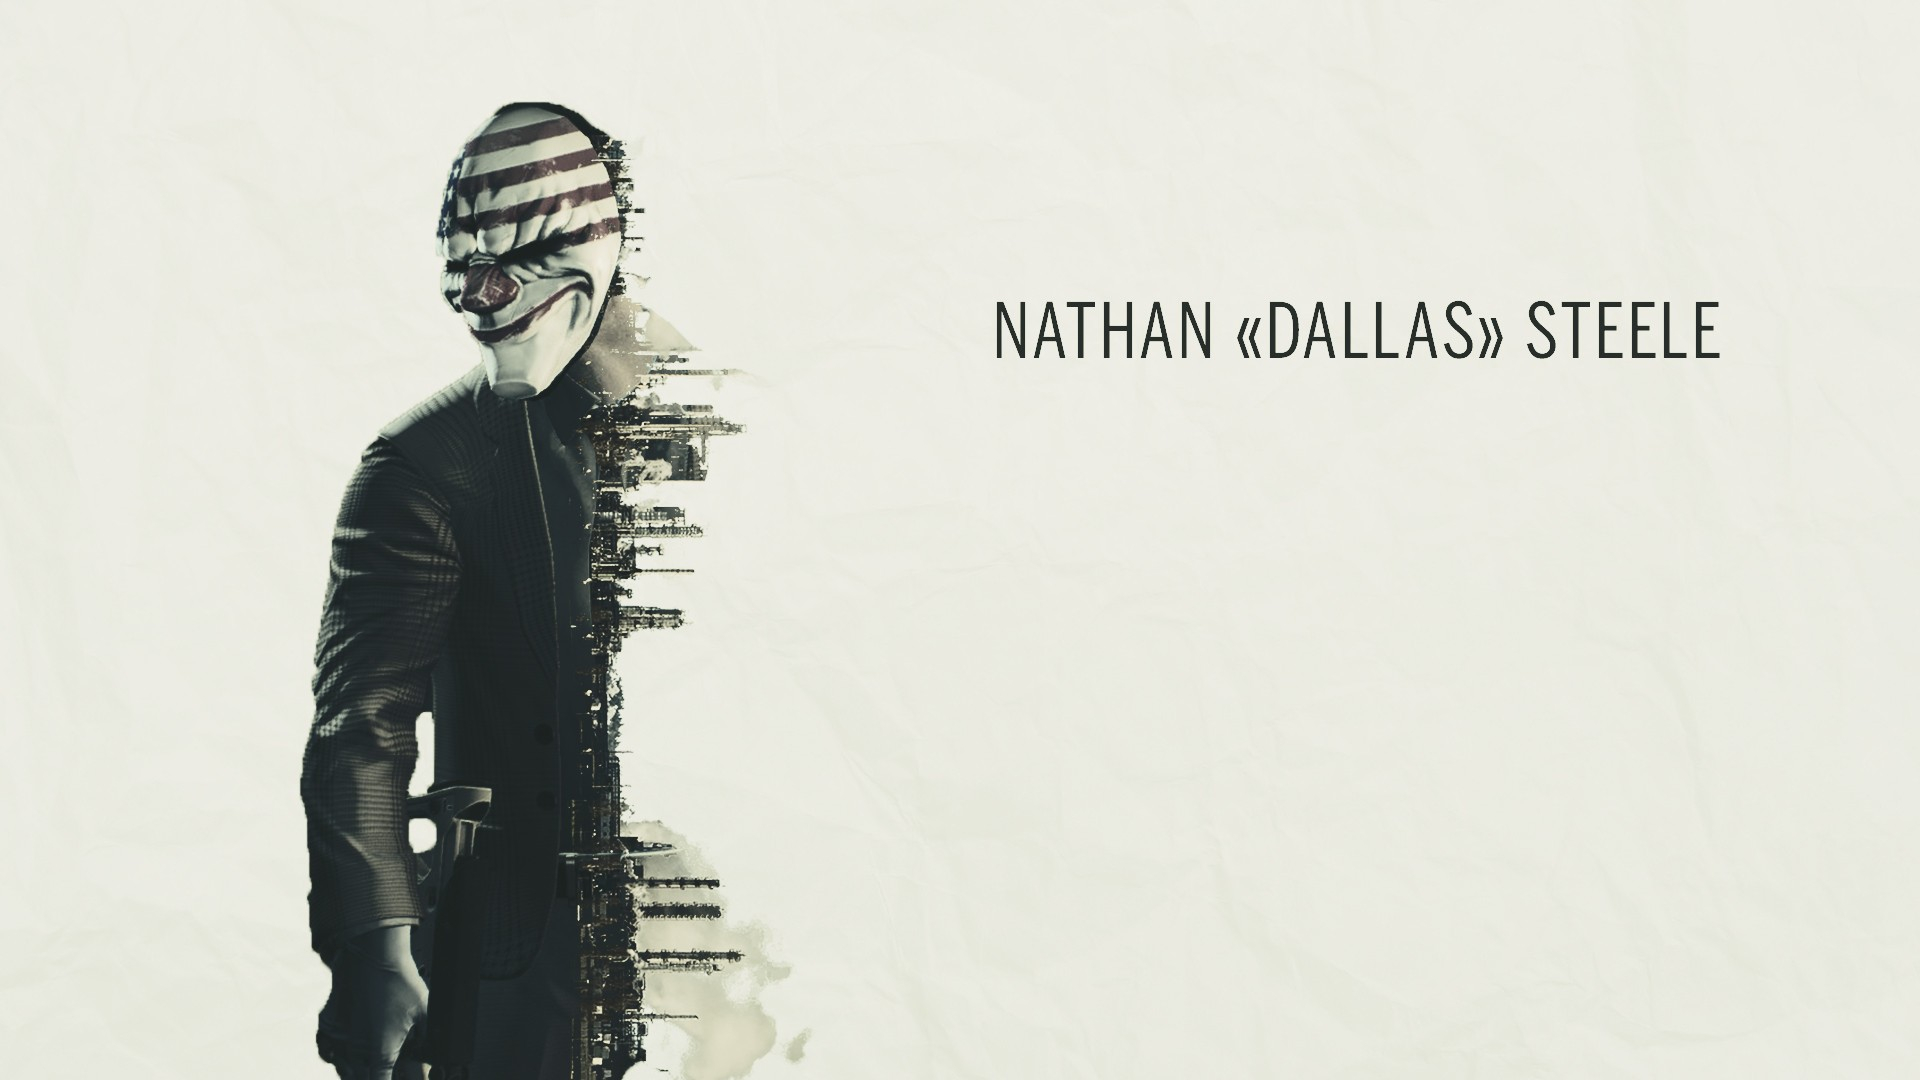 1920x1080 Wallpaper : drawing, video games, musical instrument, True Detective, brand, Payday 2, Payday The Heist, clothing, Dallas, footwear, sketch spooky 102873 HD Wallpapers